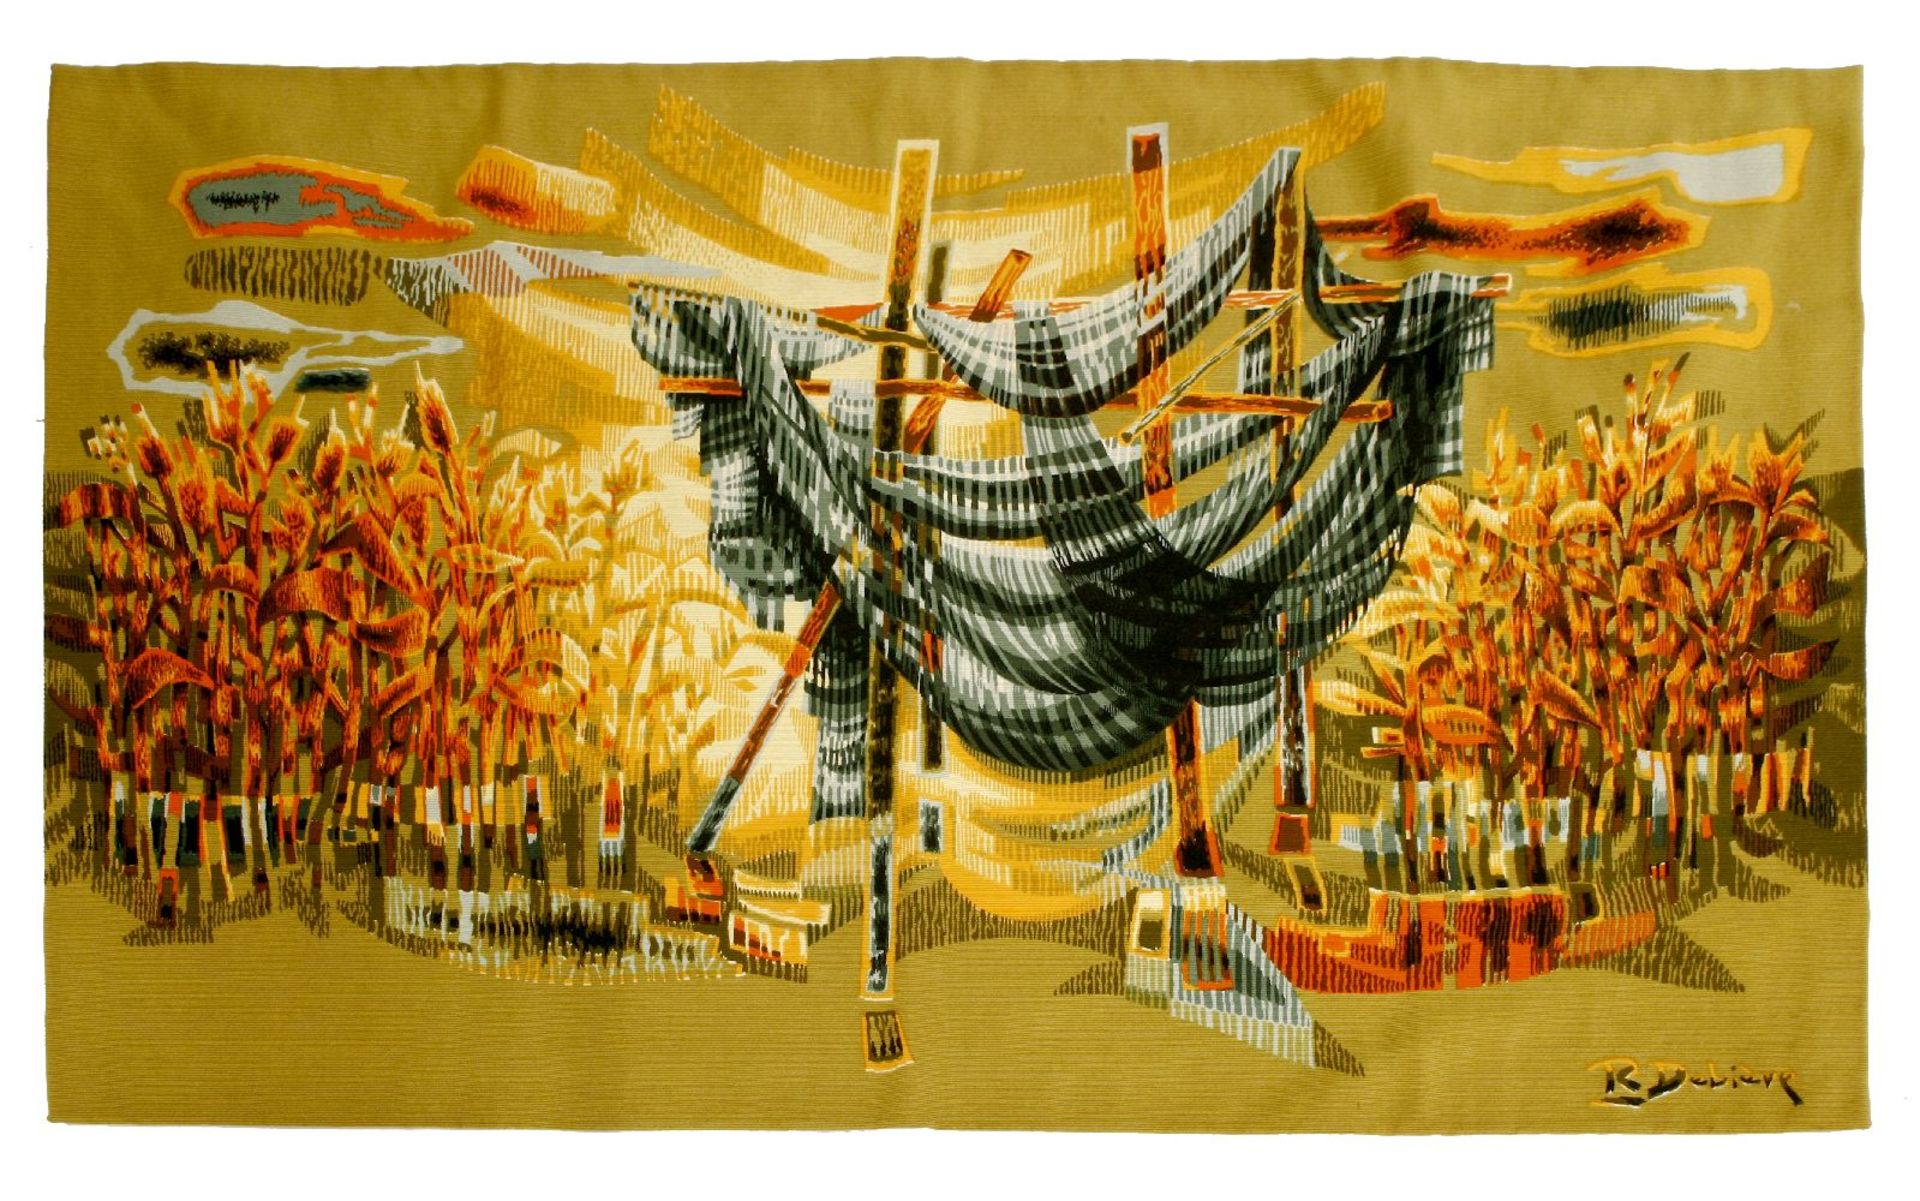 'Le Filet Aux Roseaux',a Robert Debiève tapestry panel, dated 1976, labelled and signed, numbered